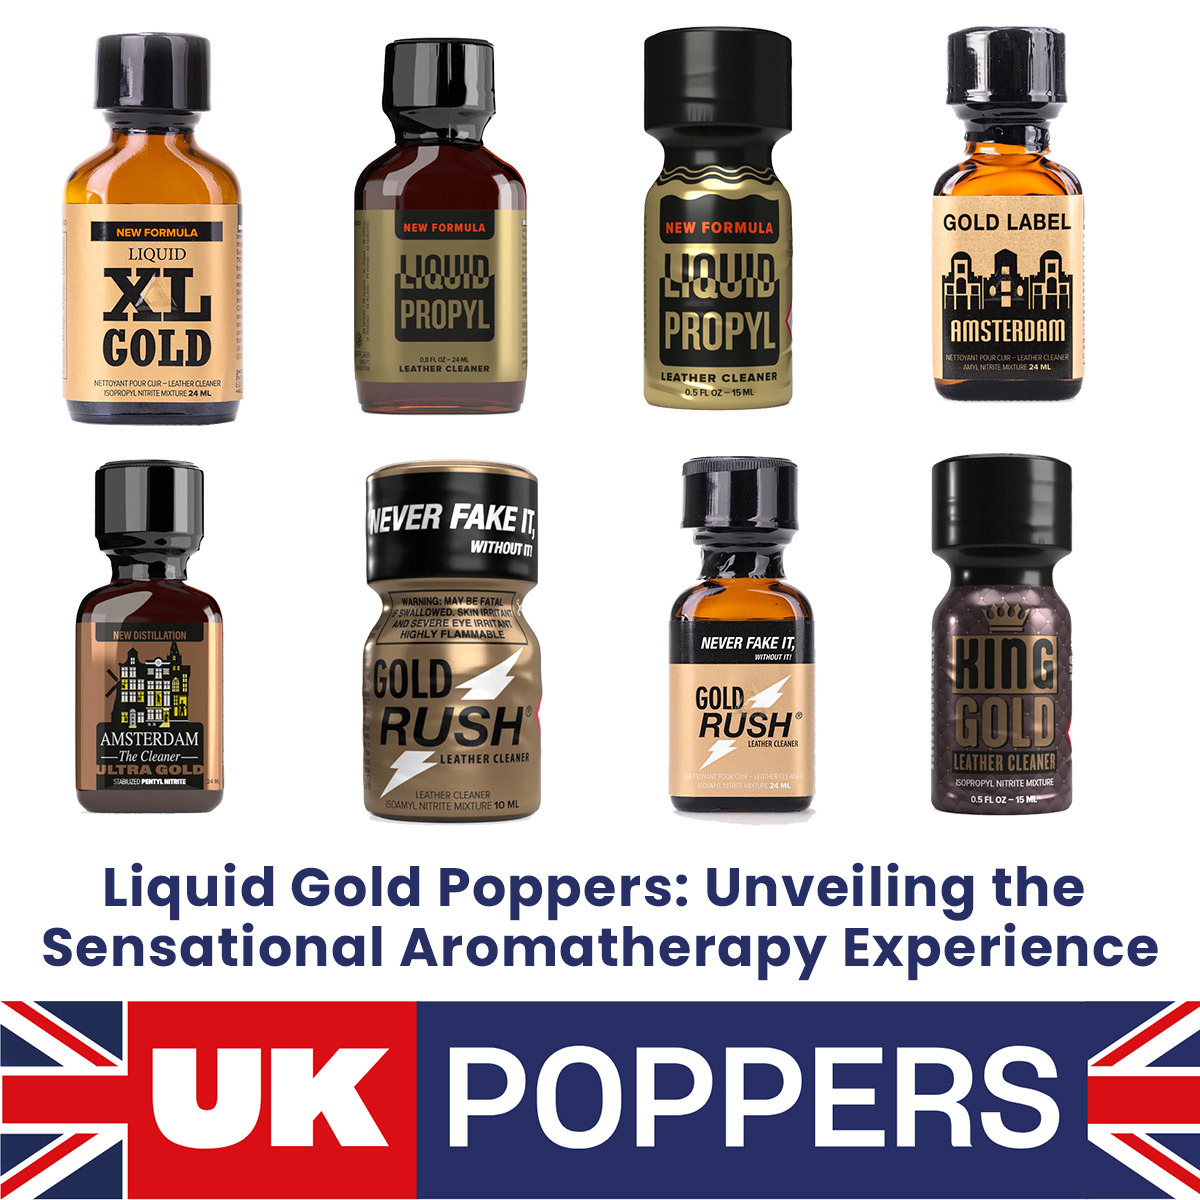 Liquid Gold Poppers: Unveiling the Sensational Aromatherapy Experience